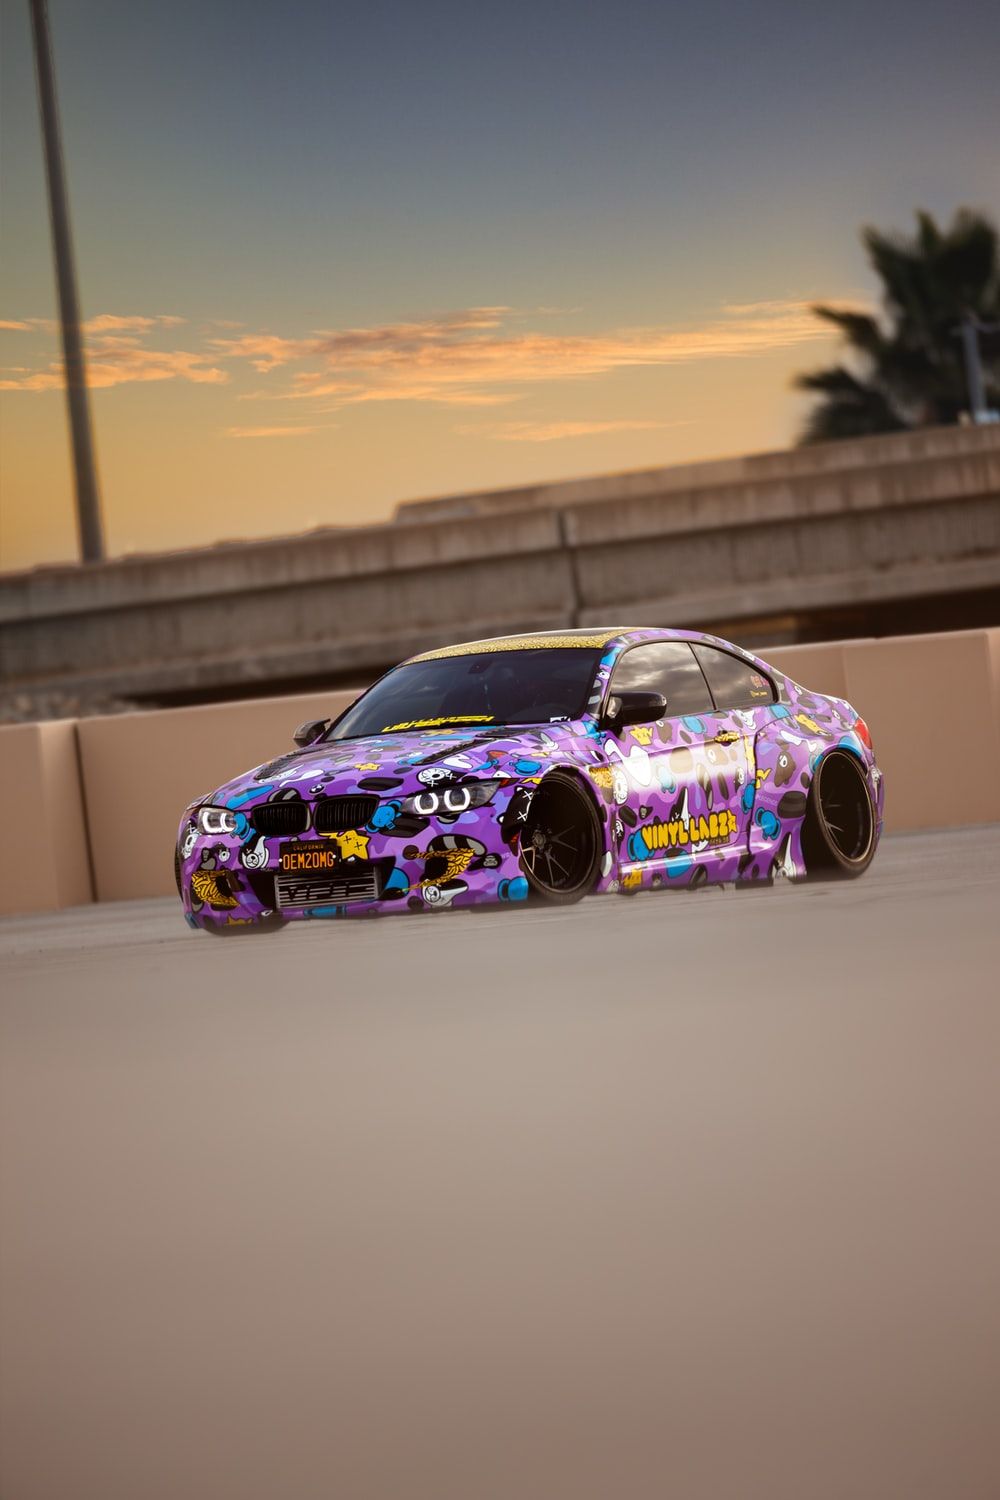 Car Wrap Picture. Download Free Image